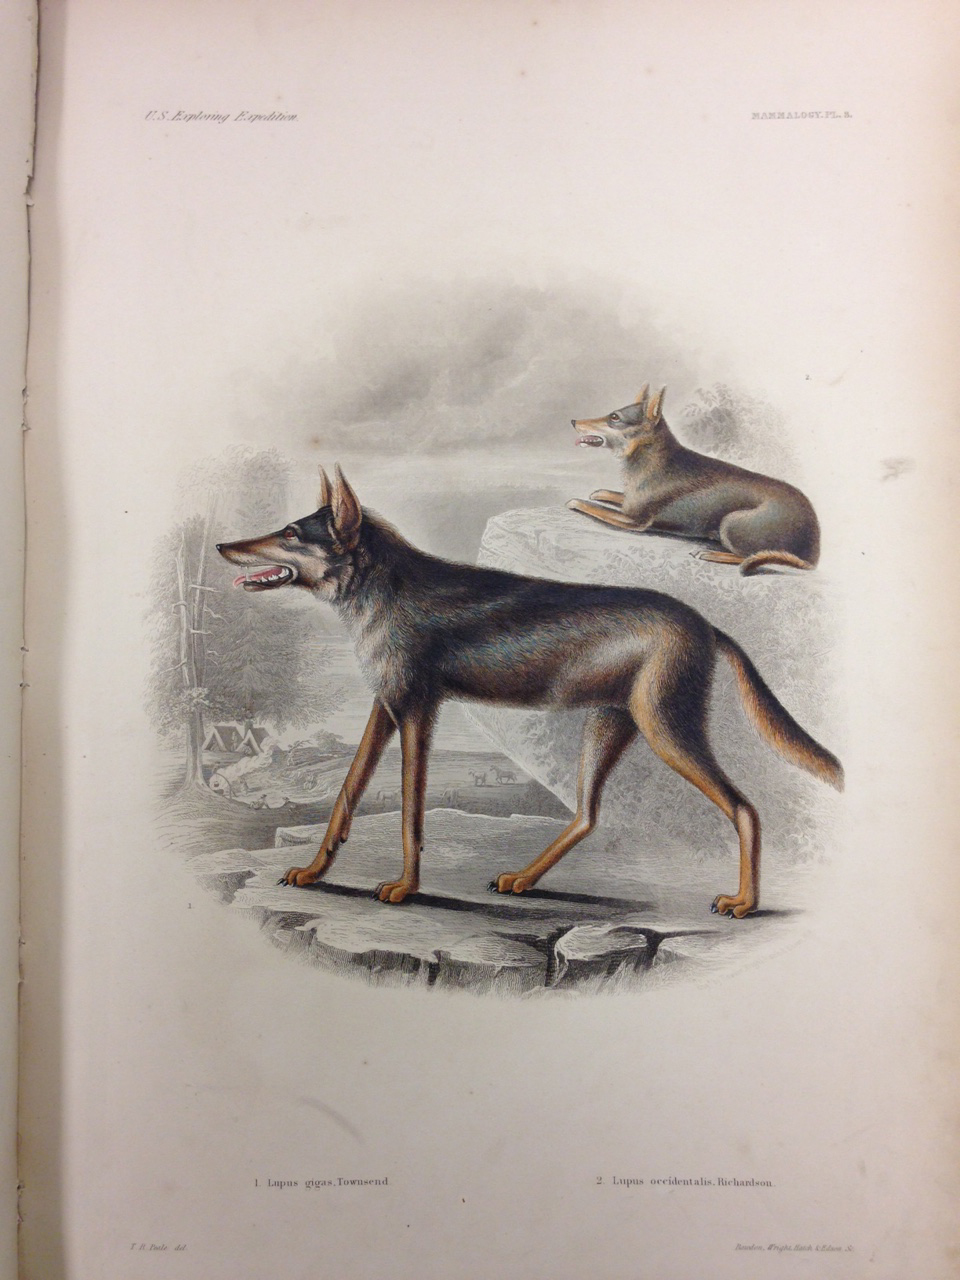 Mammalogy, Plate 3: 1. Lupus gigas. (also known as C. lupus gregoryi, Gregory’s wolf), 2. Lupus occidentalis. (Northwestern wolf). – The brown used for the eyes of these wolves has such a red hue and the teeth are so prominent that it is clear the illustrator found these wolves intimidating. 